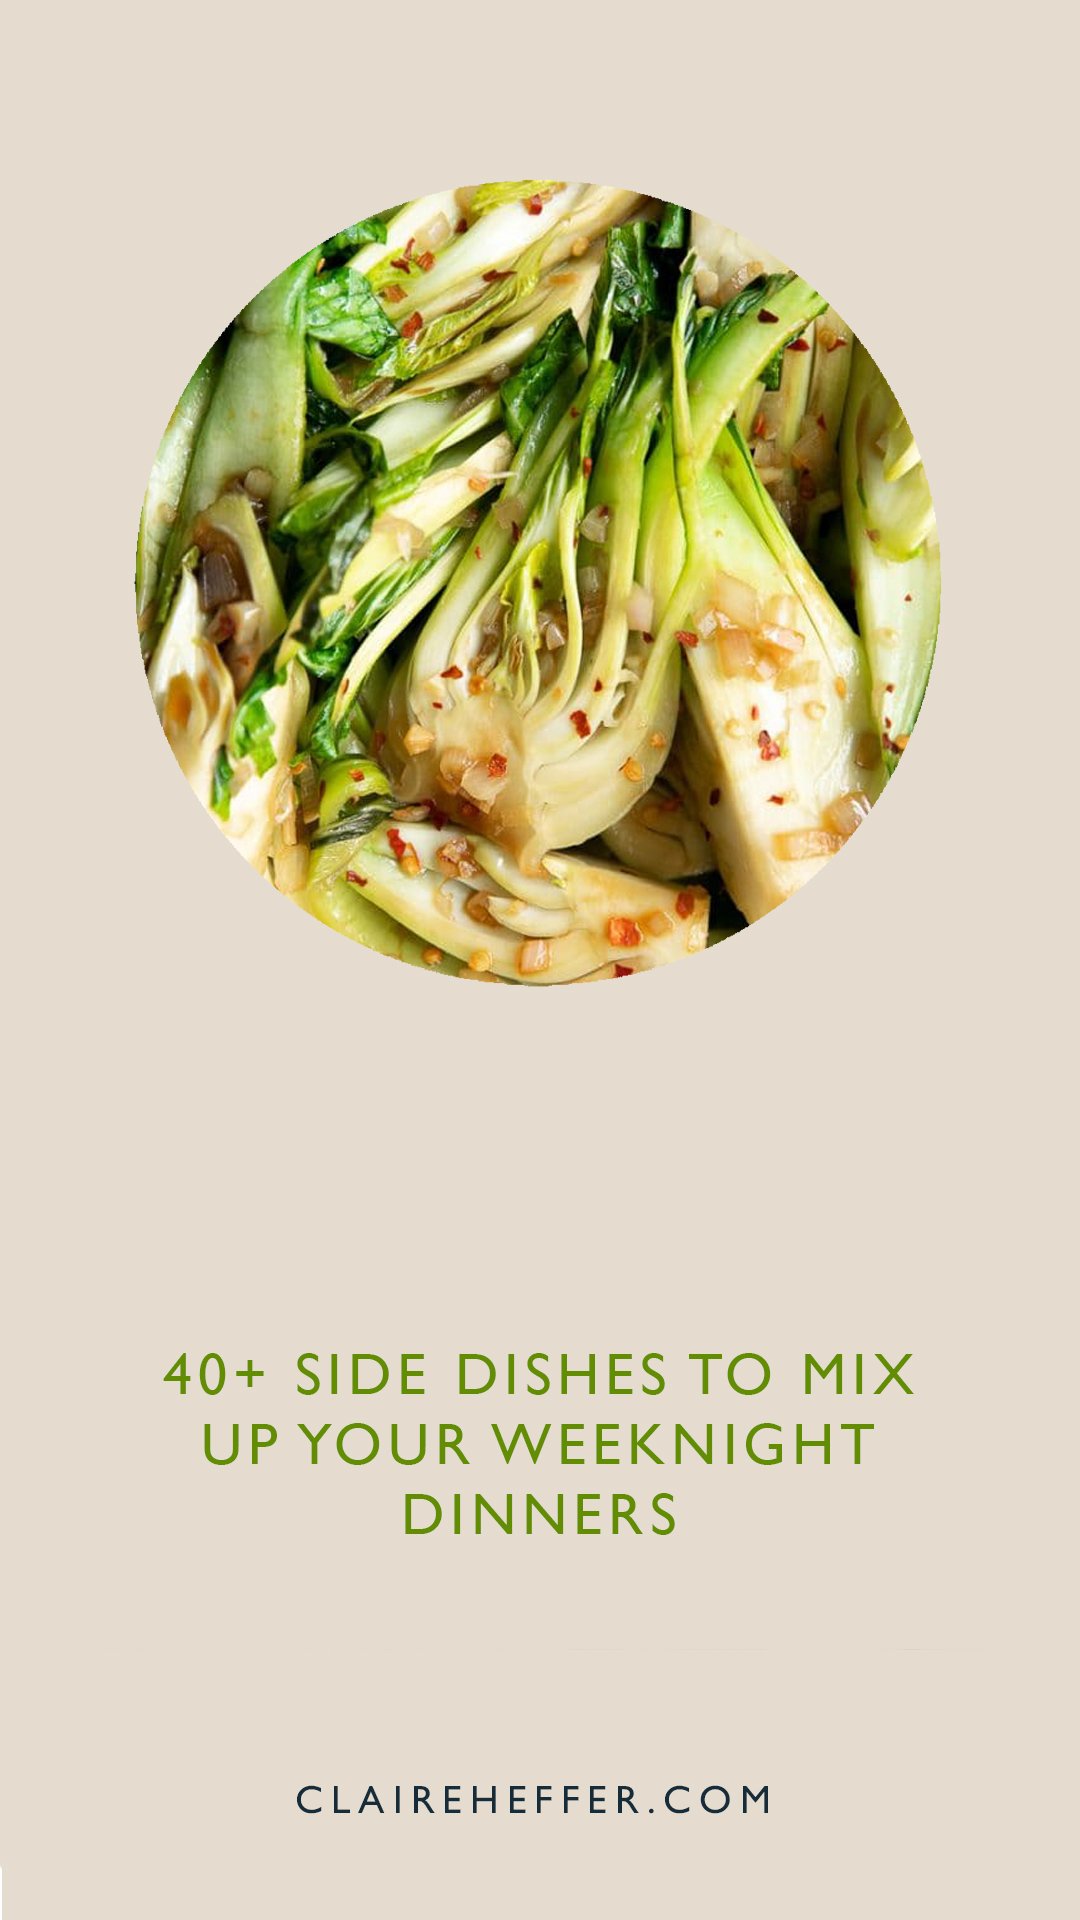 ide Dishes For When You Need Dinner Inspiration, Dishes For When You’re Stuck For What Put On The Side Of Your Plate,  Side Dish Inspiration, Veggie Side Dish Inspiration, Pasta Salad, 